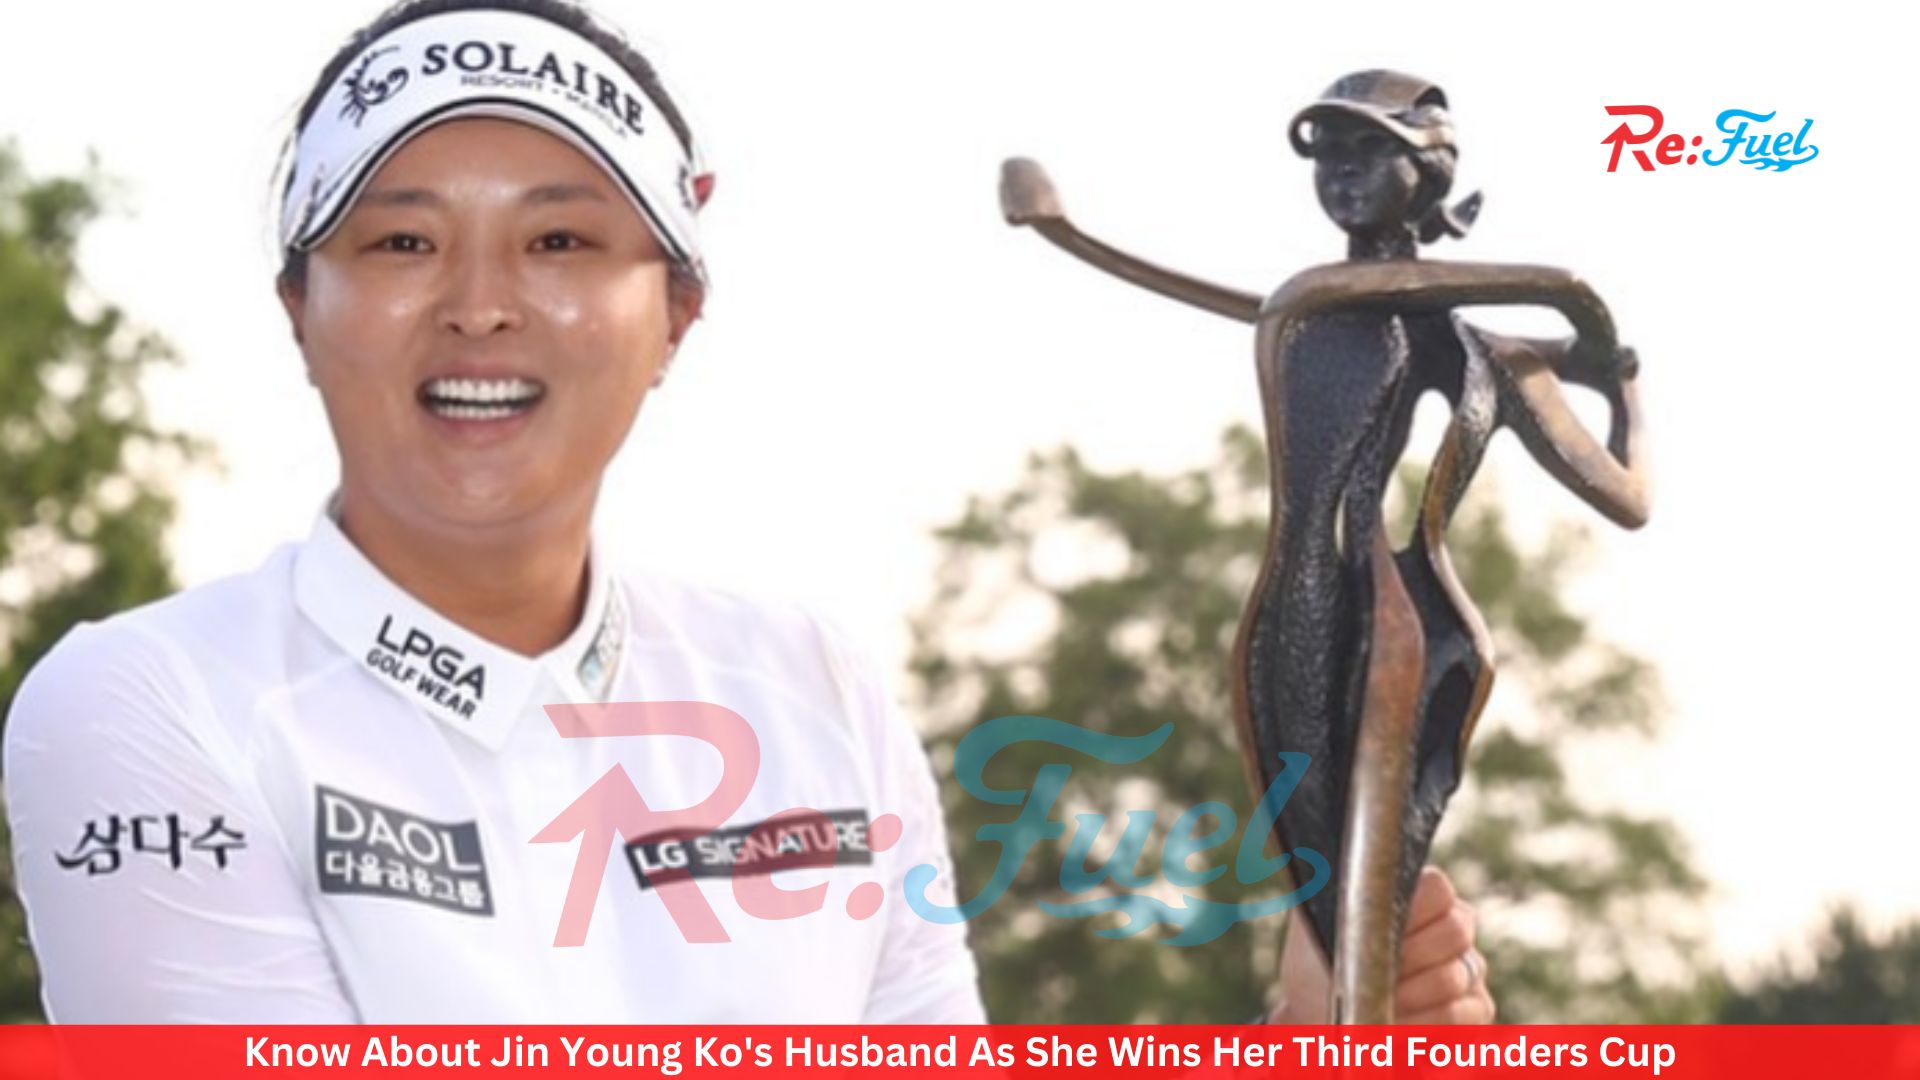 Know About Jin Young Ko's Husband As She Wins Her Third Founders Cup